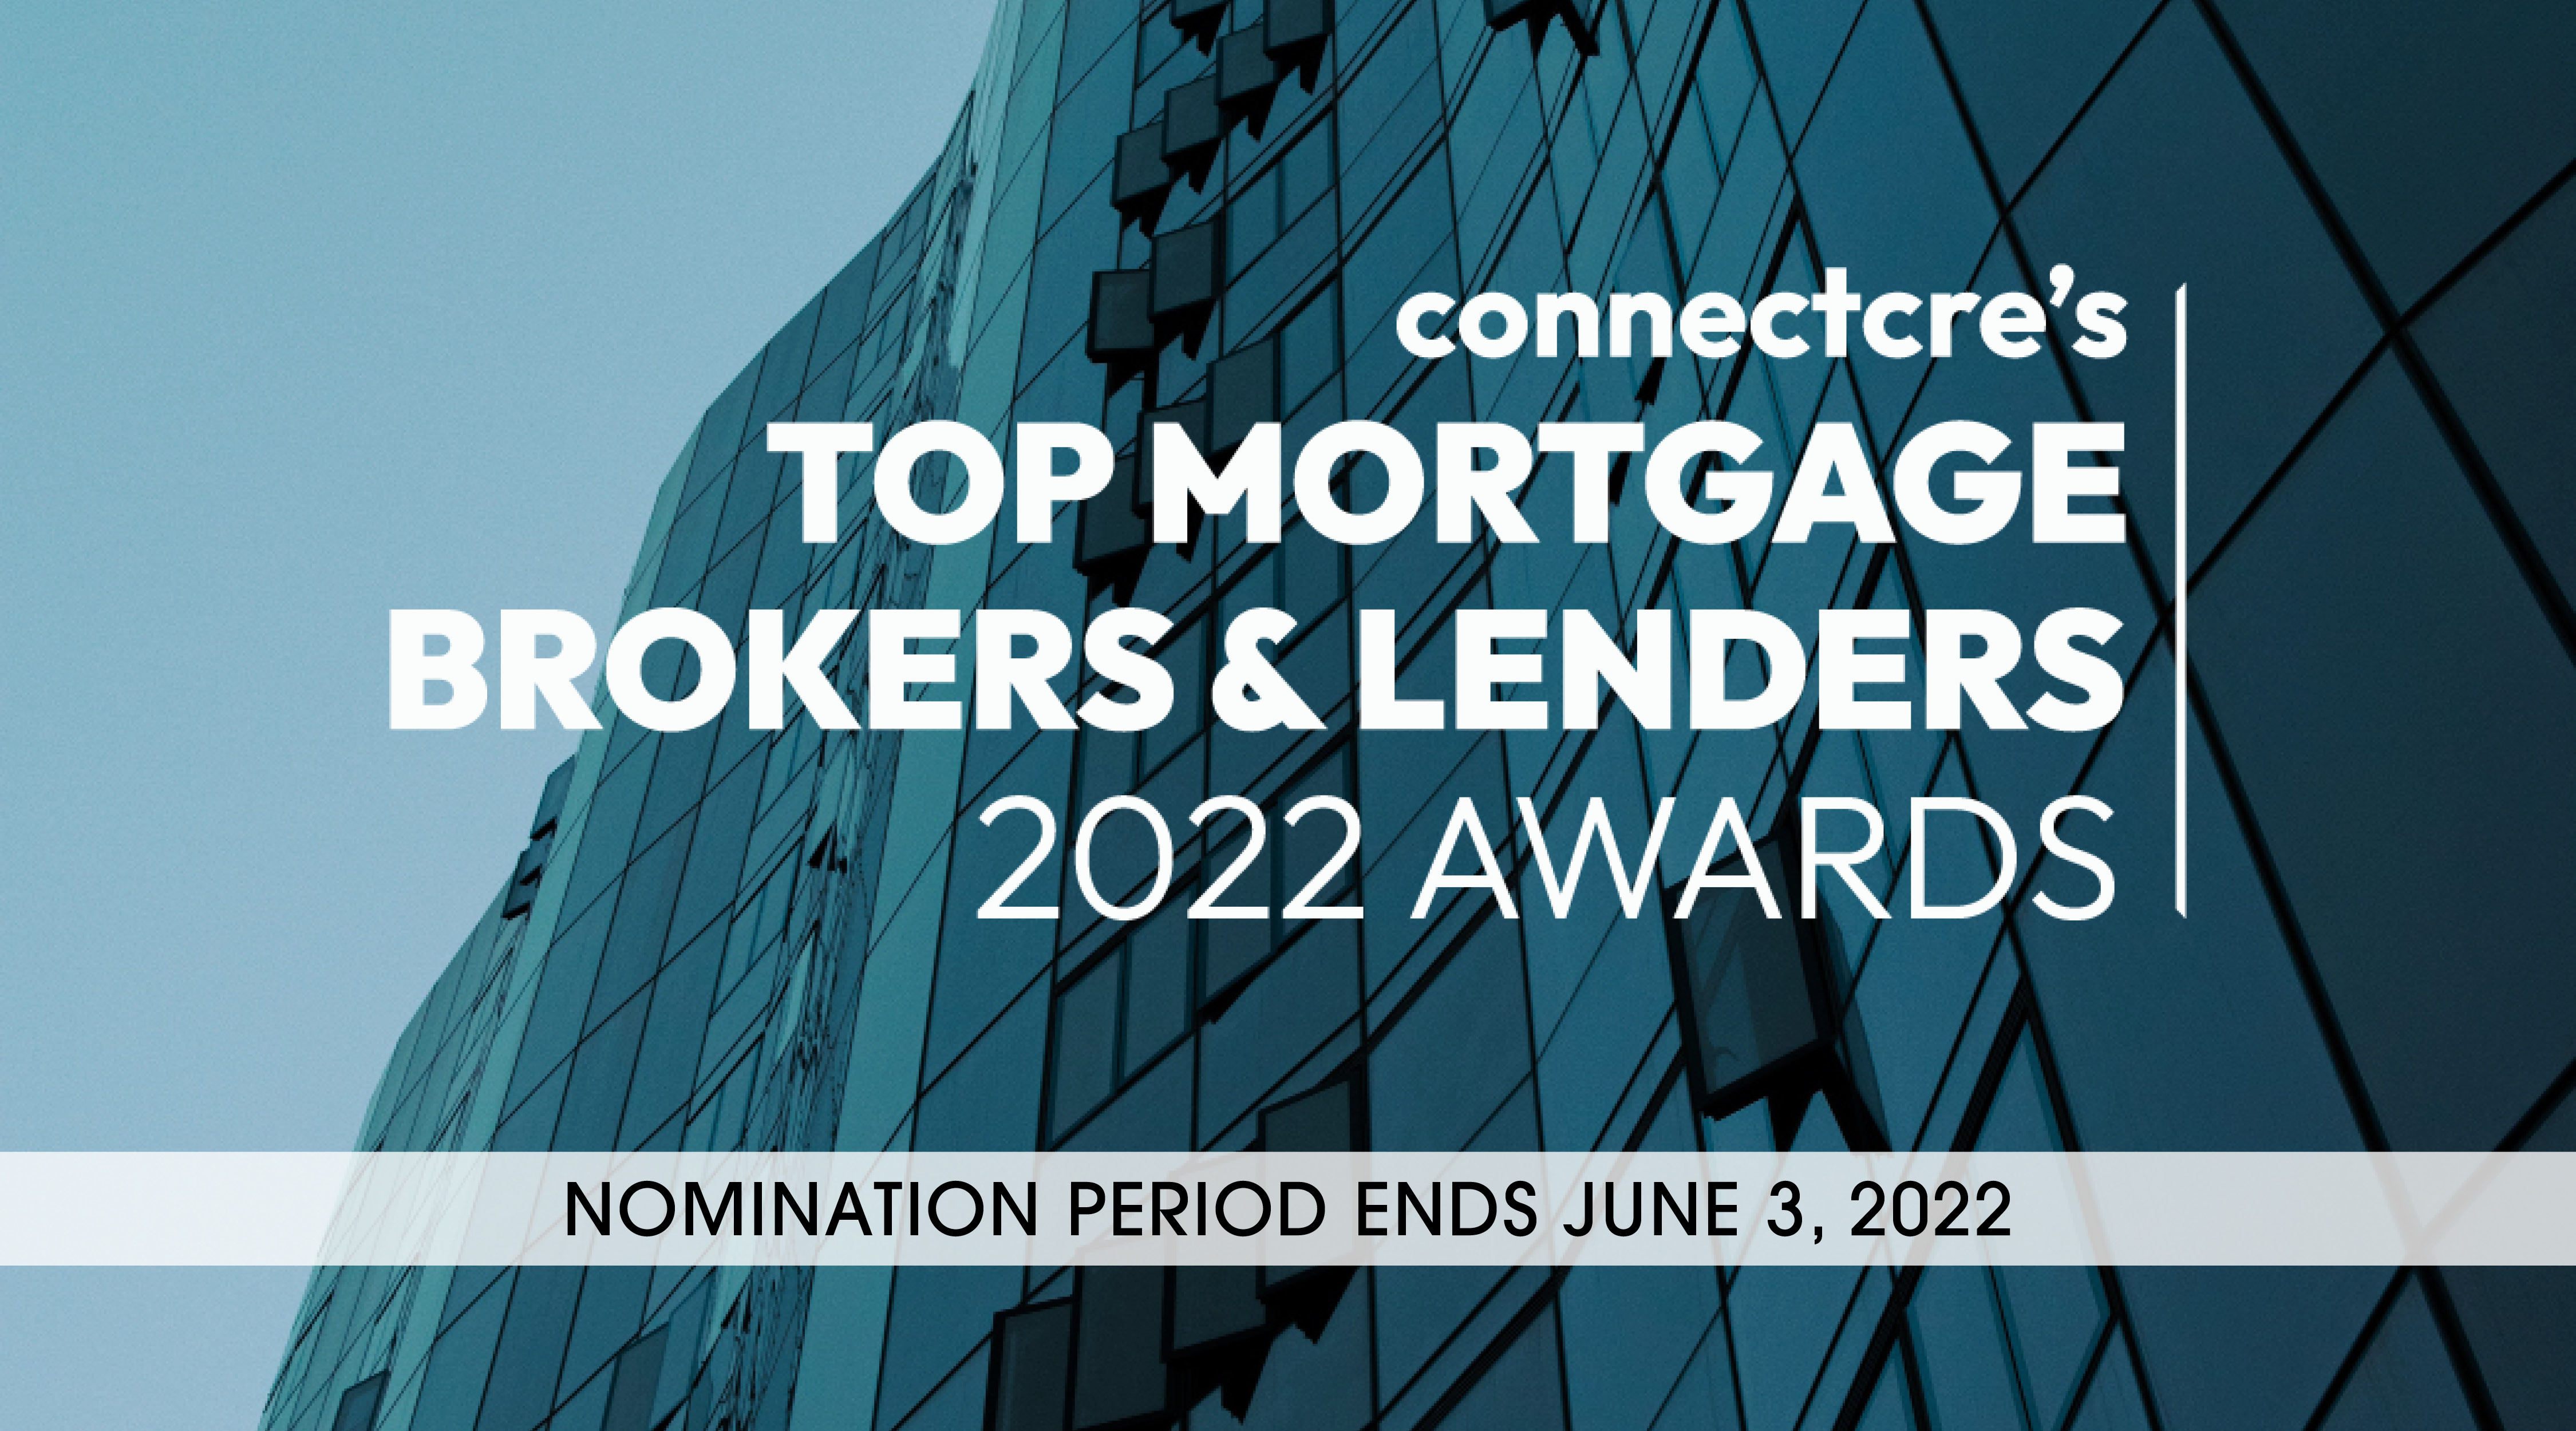 2022 Top and Lenders Awards - Submit your nomination today